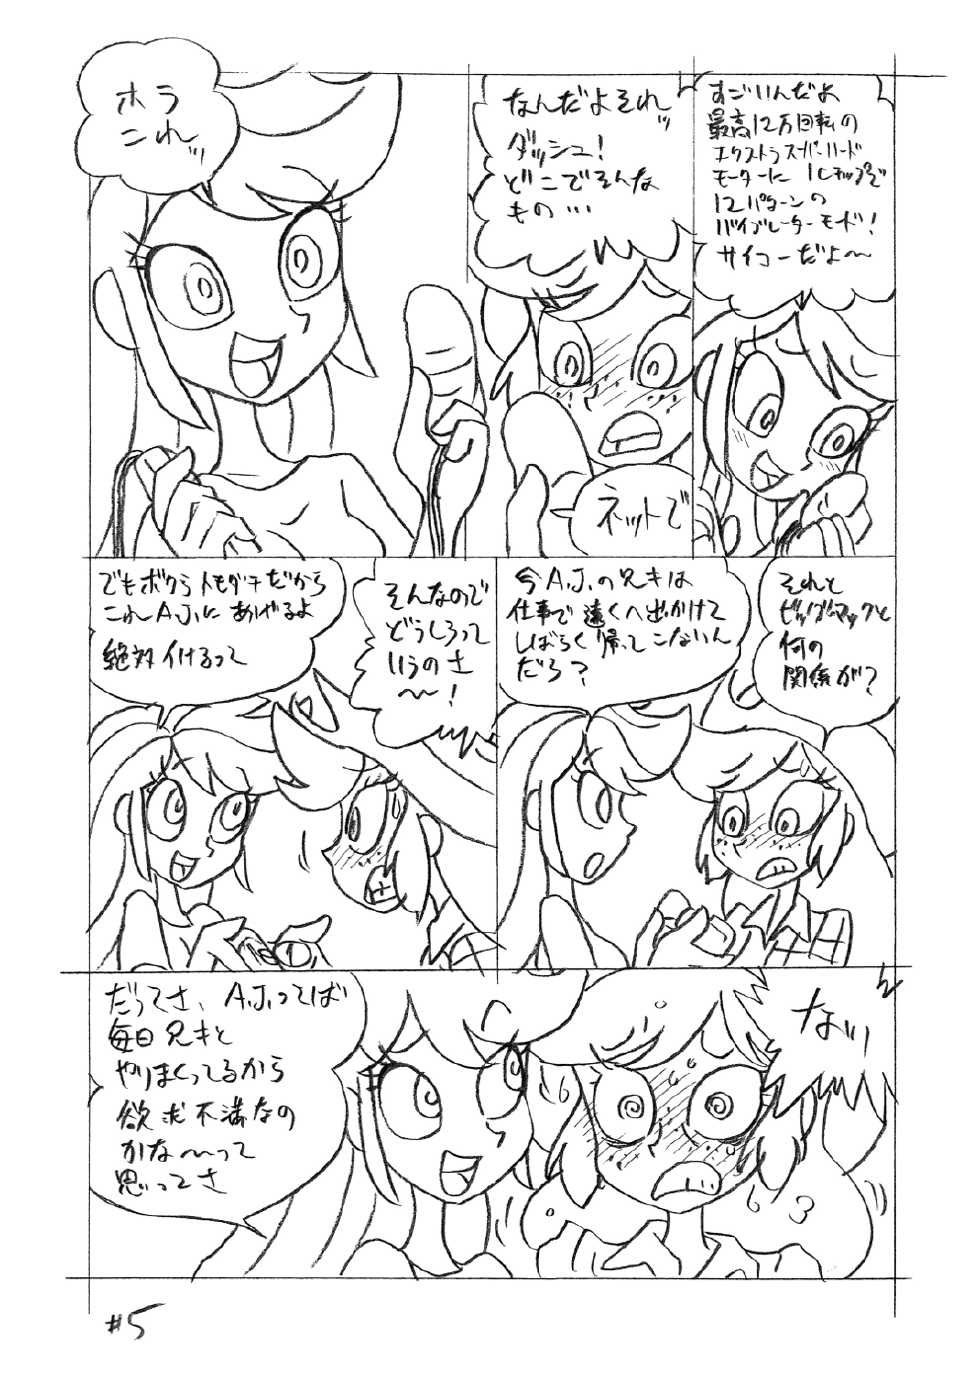 [Union of the Snake (Shinda Mane)] Psychosomatic Counterfeit EX- A.J. in E.G. Style (Ver. 02) (My Little Pony: Friendship Is Magic) - Page 4